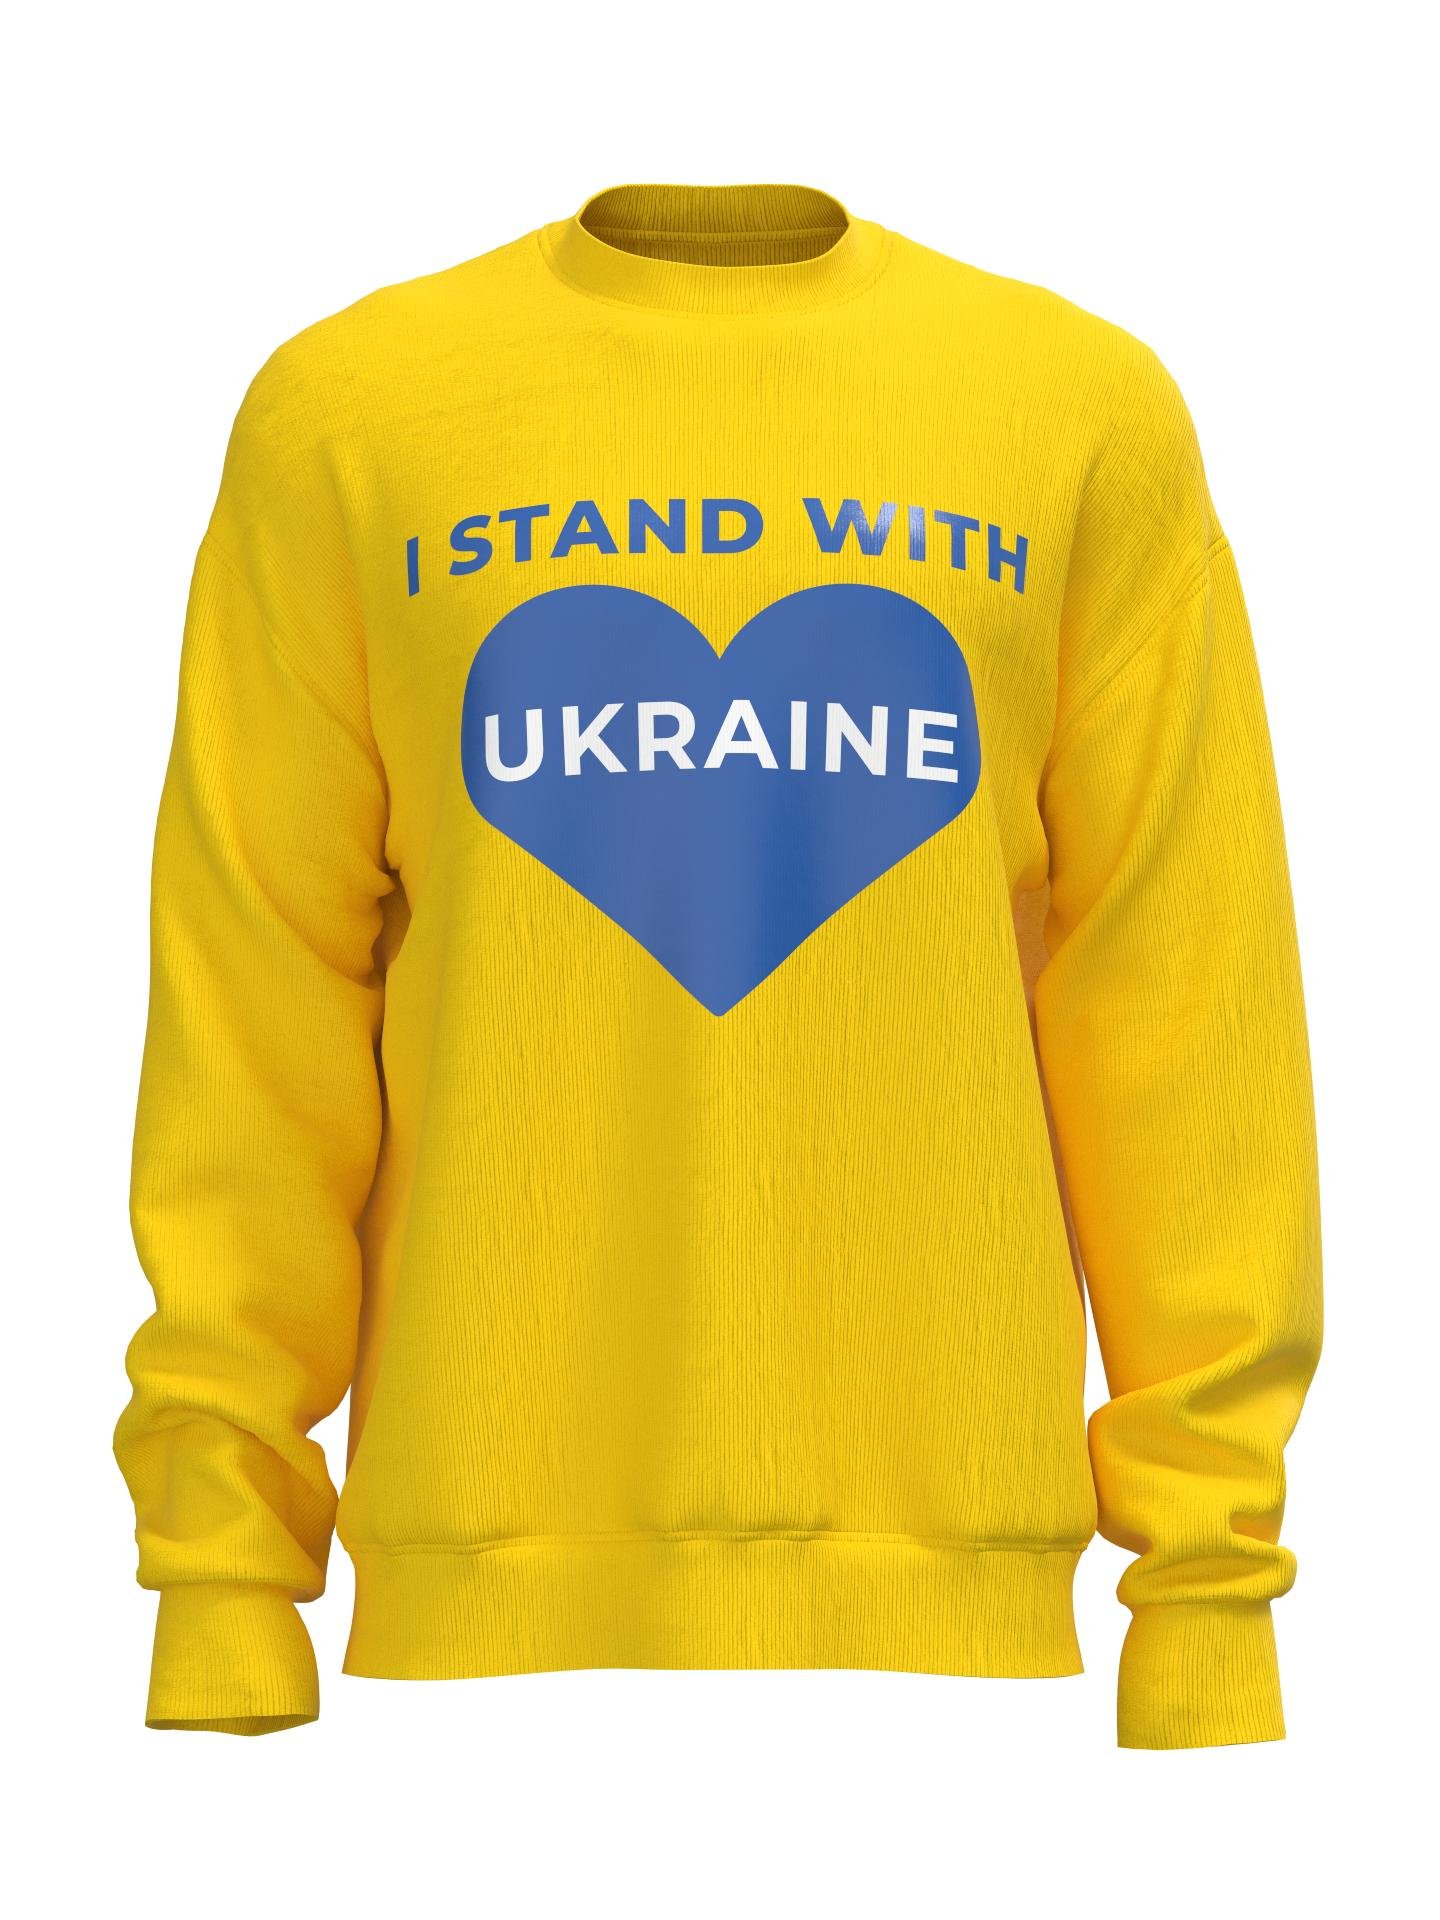 FASHION for PEACE Sweatshirt by SUPPORT UKRAINE COLLECTION